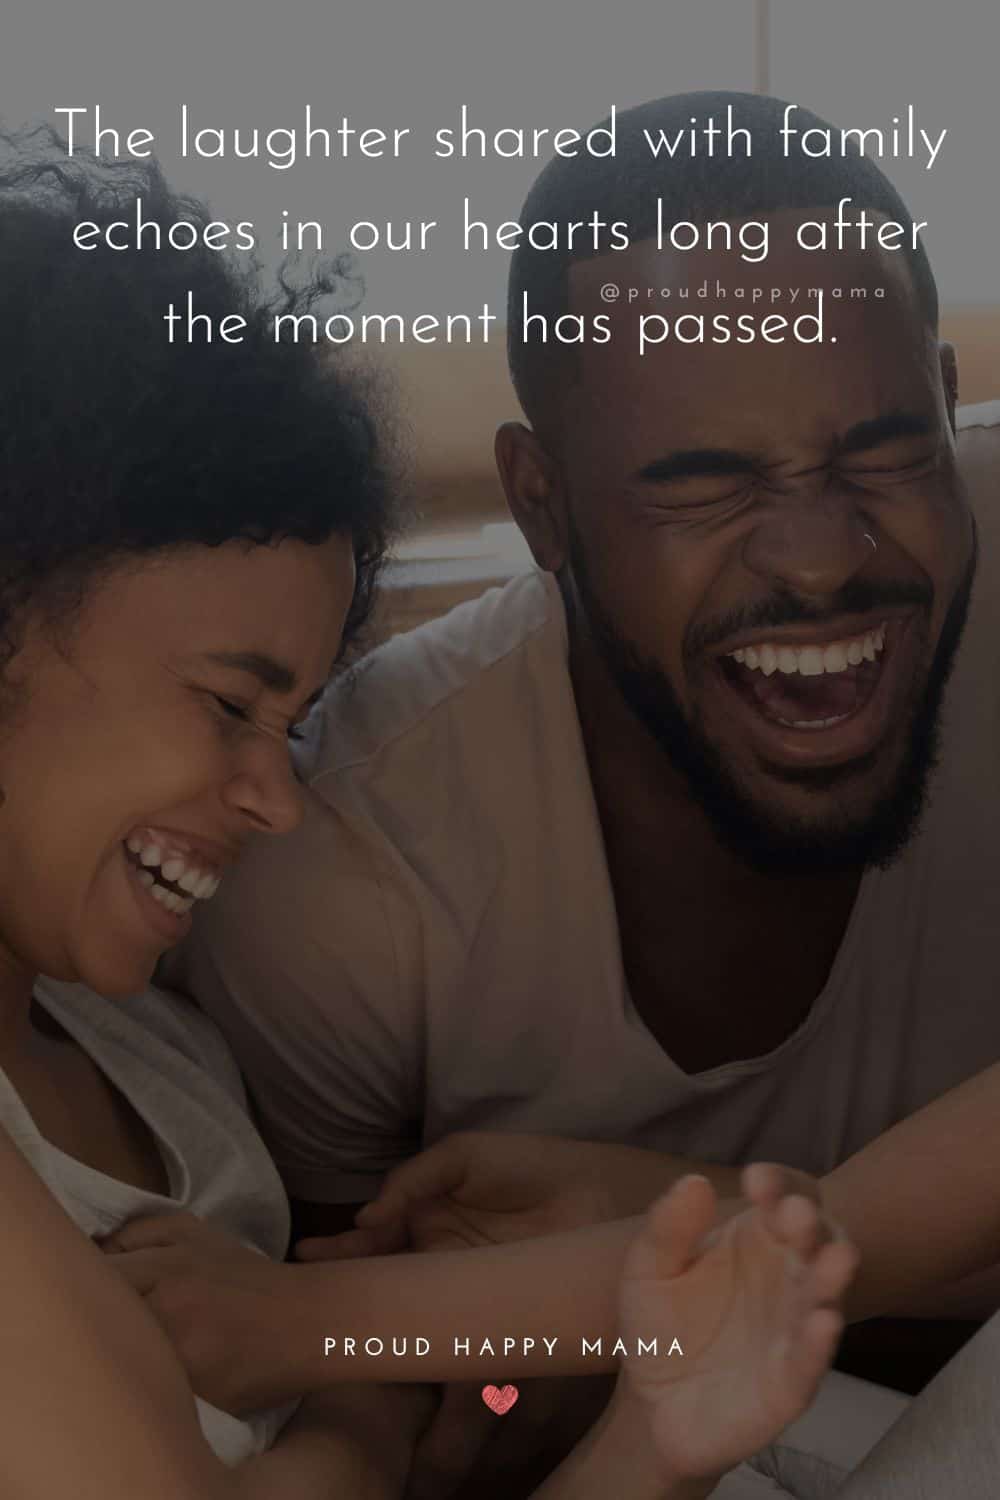 time with family quotes - The laughter shared with family echoes in our hearts long after the moment has passed.